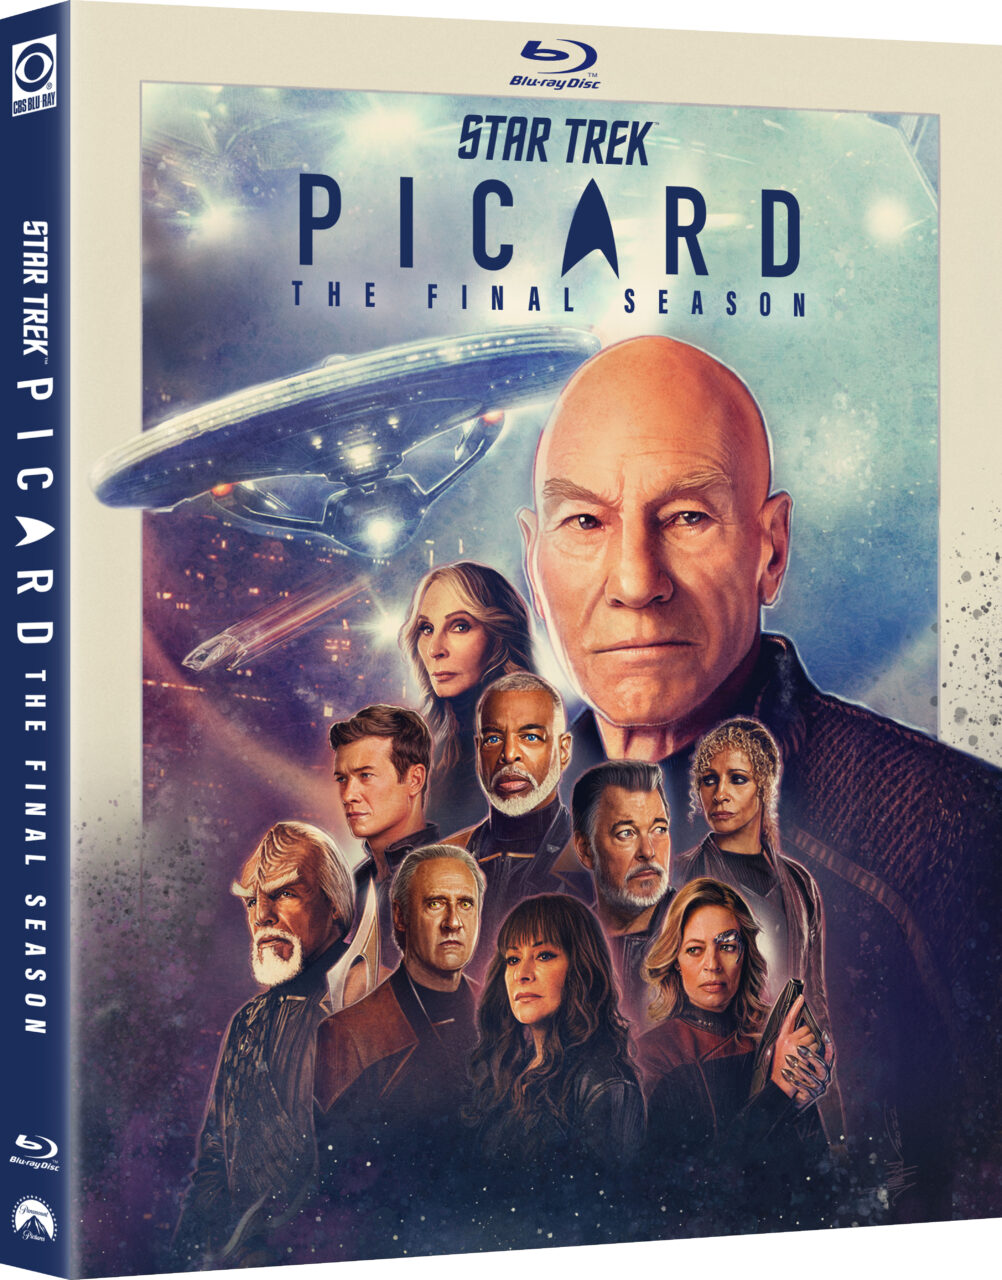 Star Trek: Picard - The Final Season Blu-Ray Combo Pack cover (Paramount Home Entertainment)